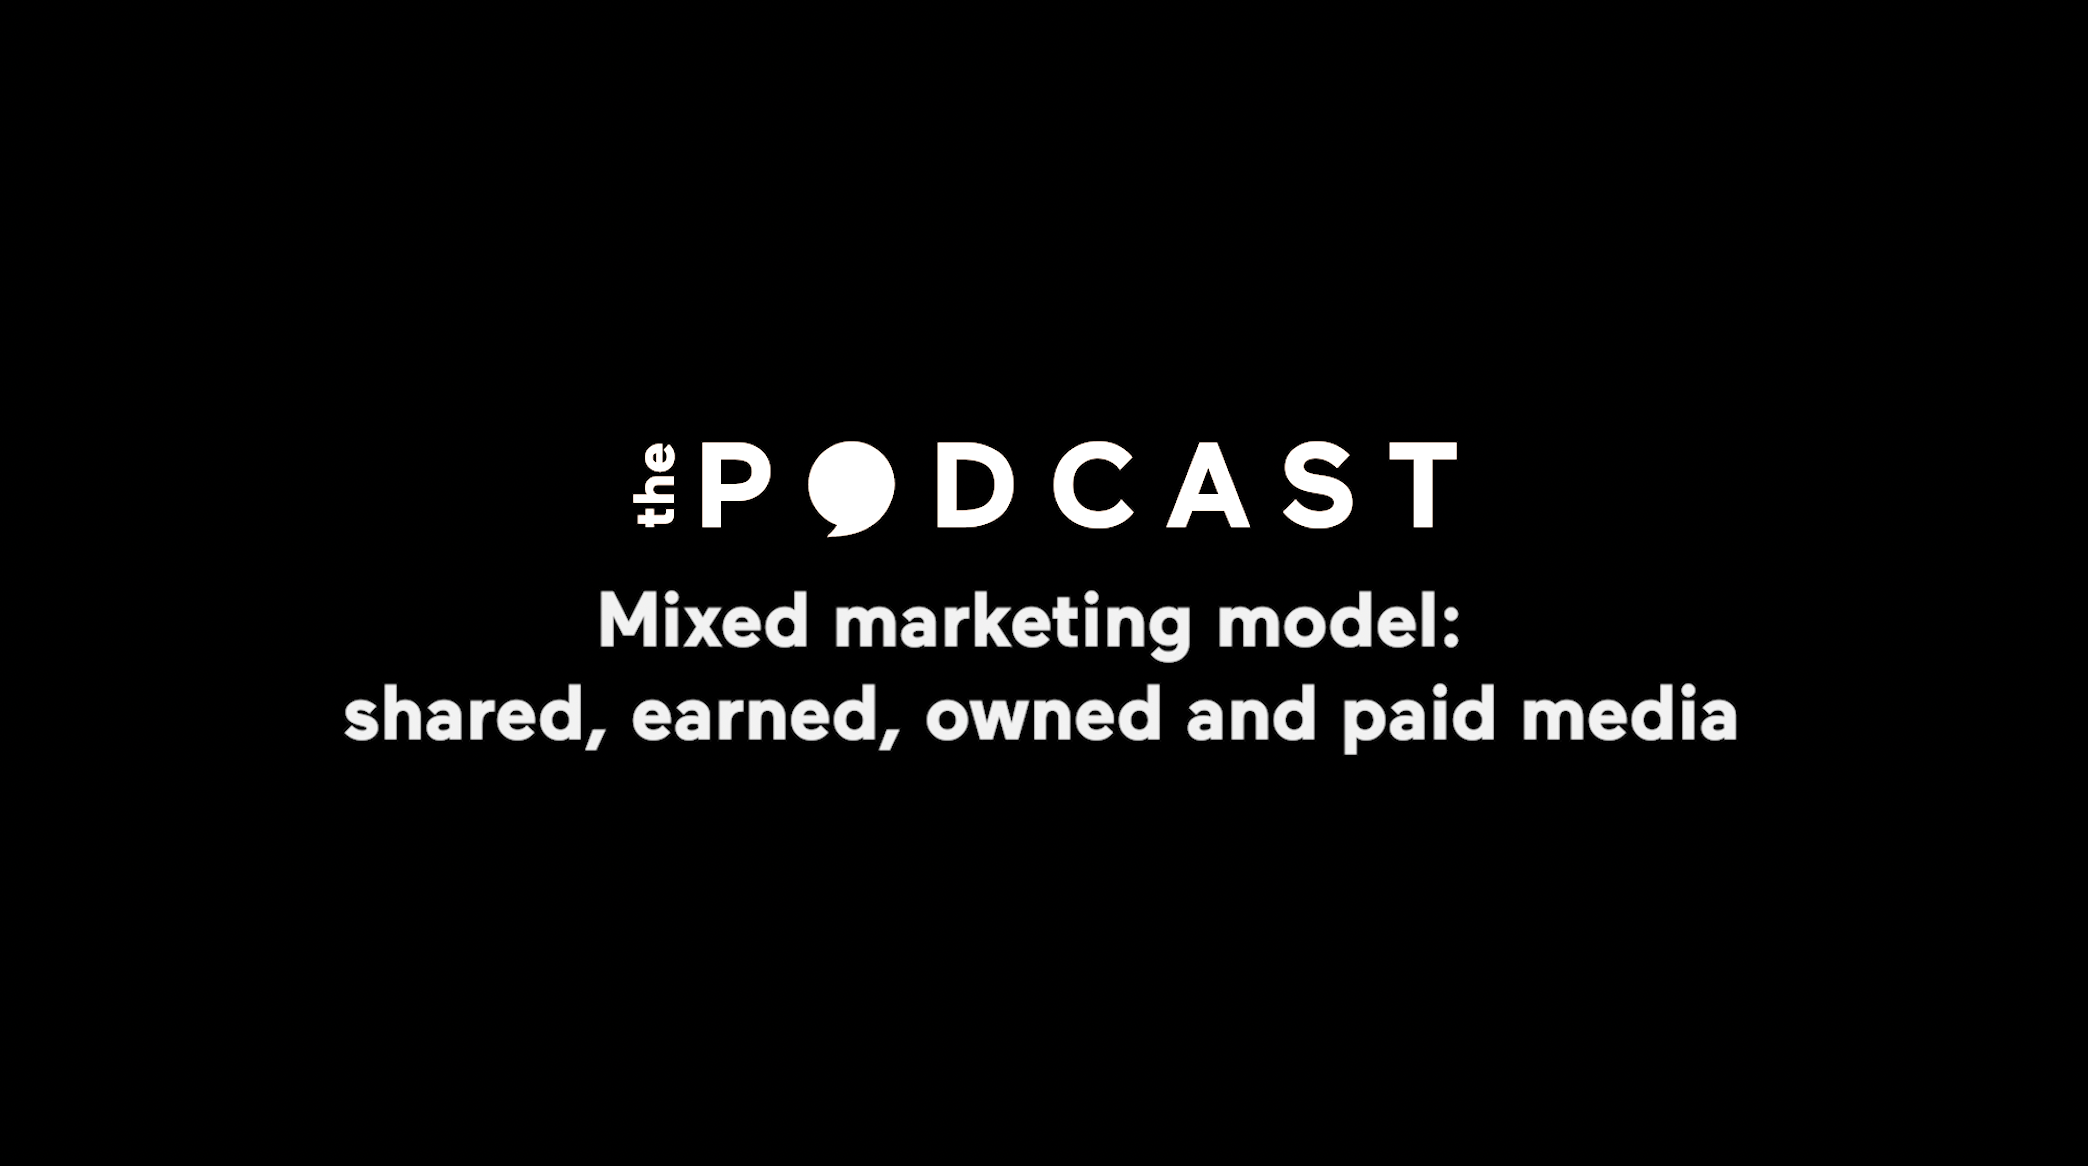 The mixed marketing model: paid, shared, earned and owned media